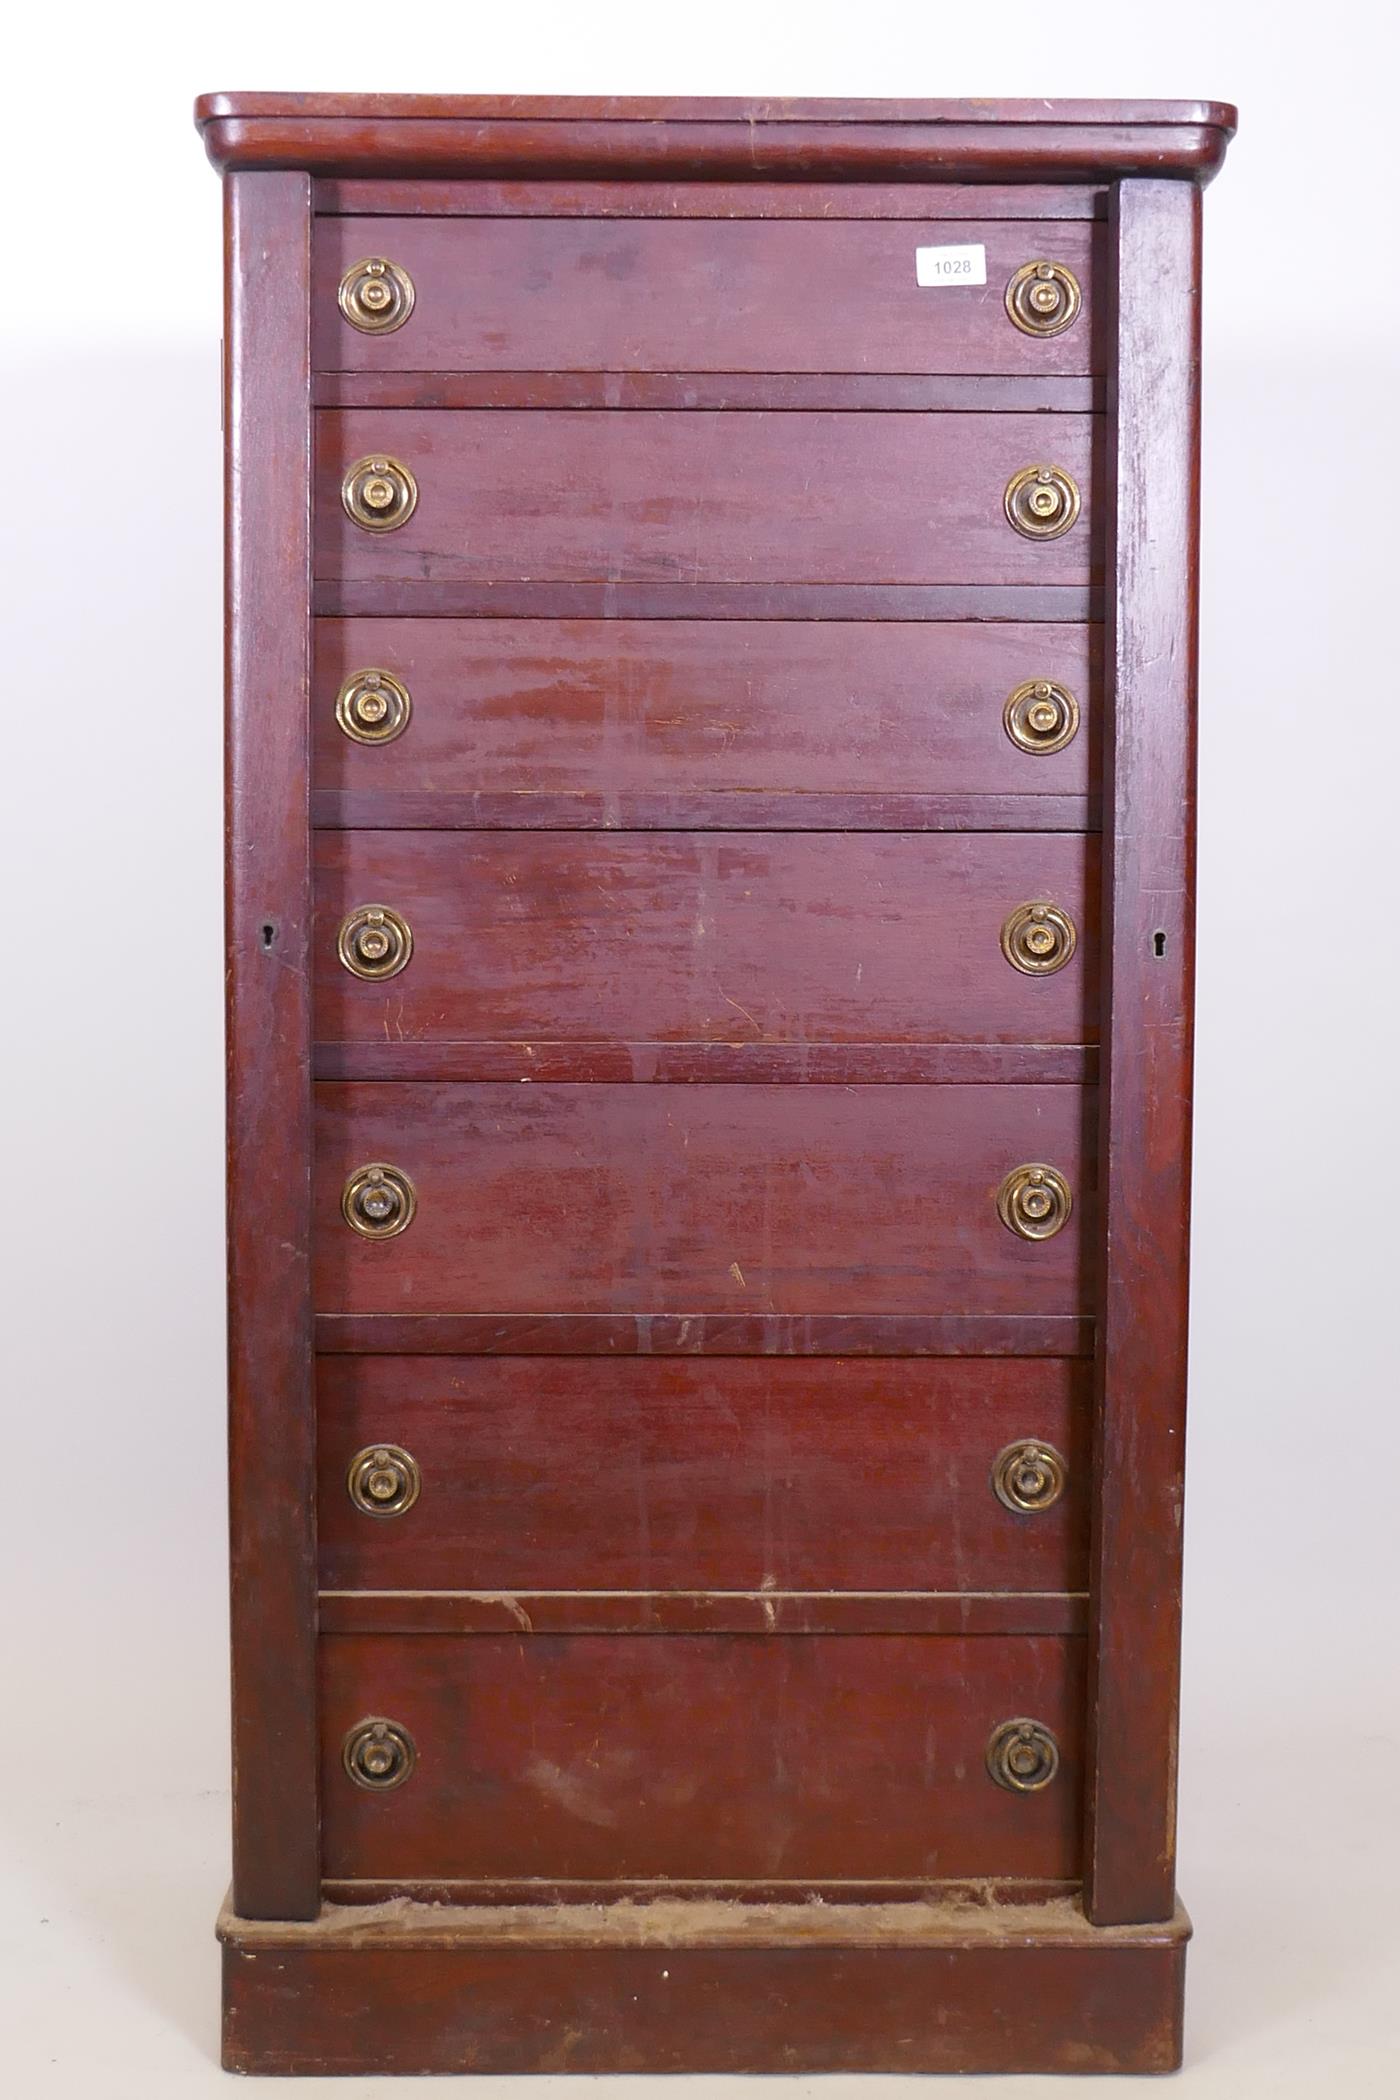 A C19th mahogany seven drawer Wellington chest, with brass ring handles, raised on a plinth base, - Image 2 of 3